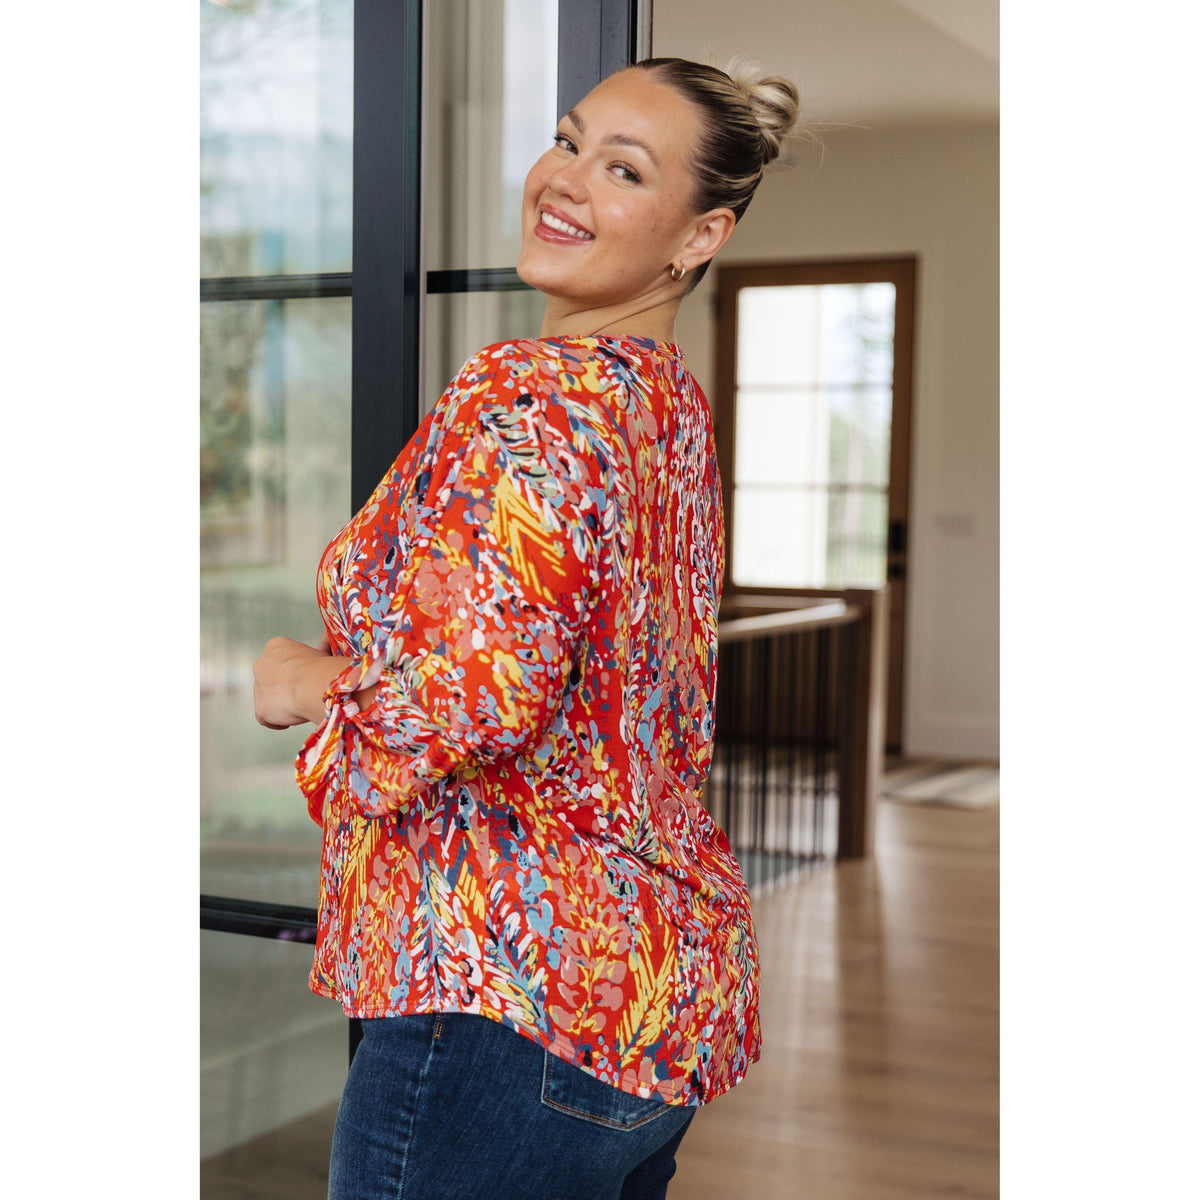 Not So Silly Keyhole Neckline Blouse - becauseofadi